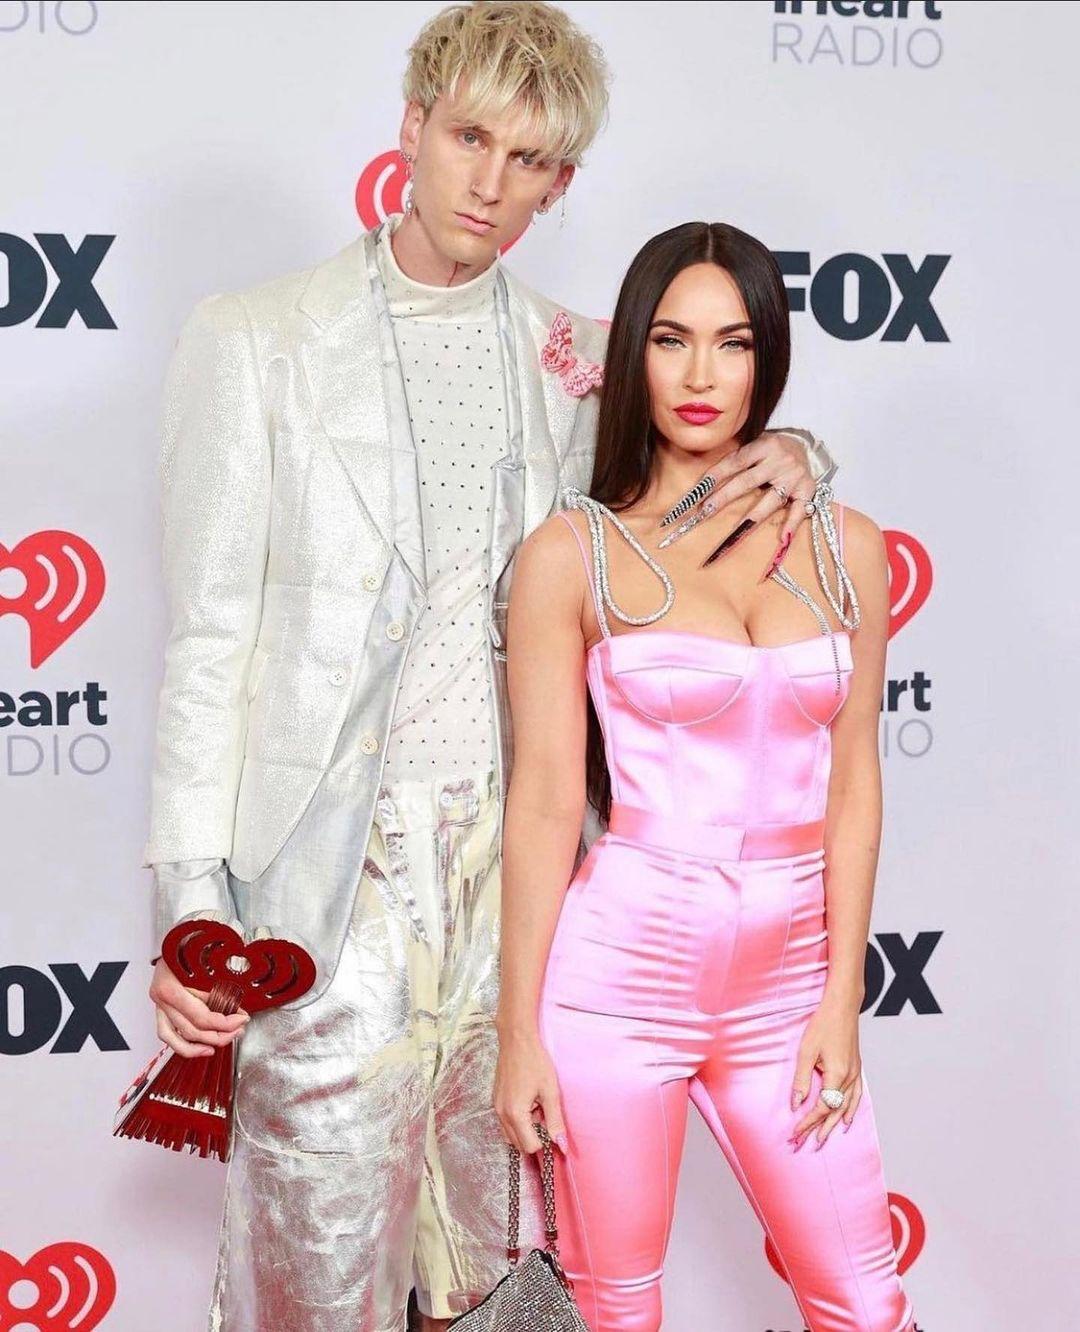 A photo of Machine Gun Kelly and Megan Fox all dolled up at an event